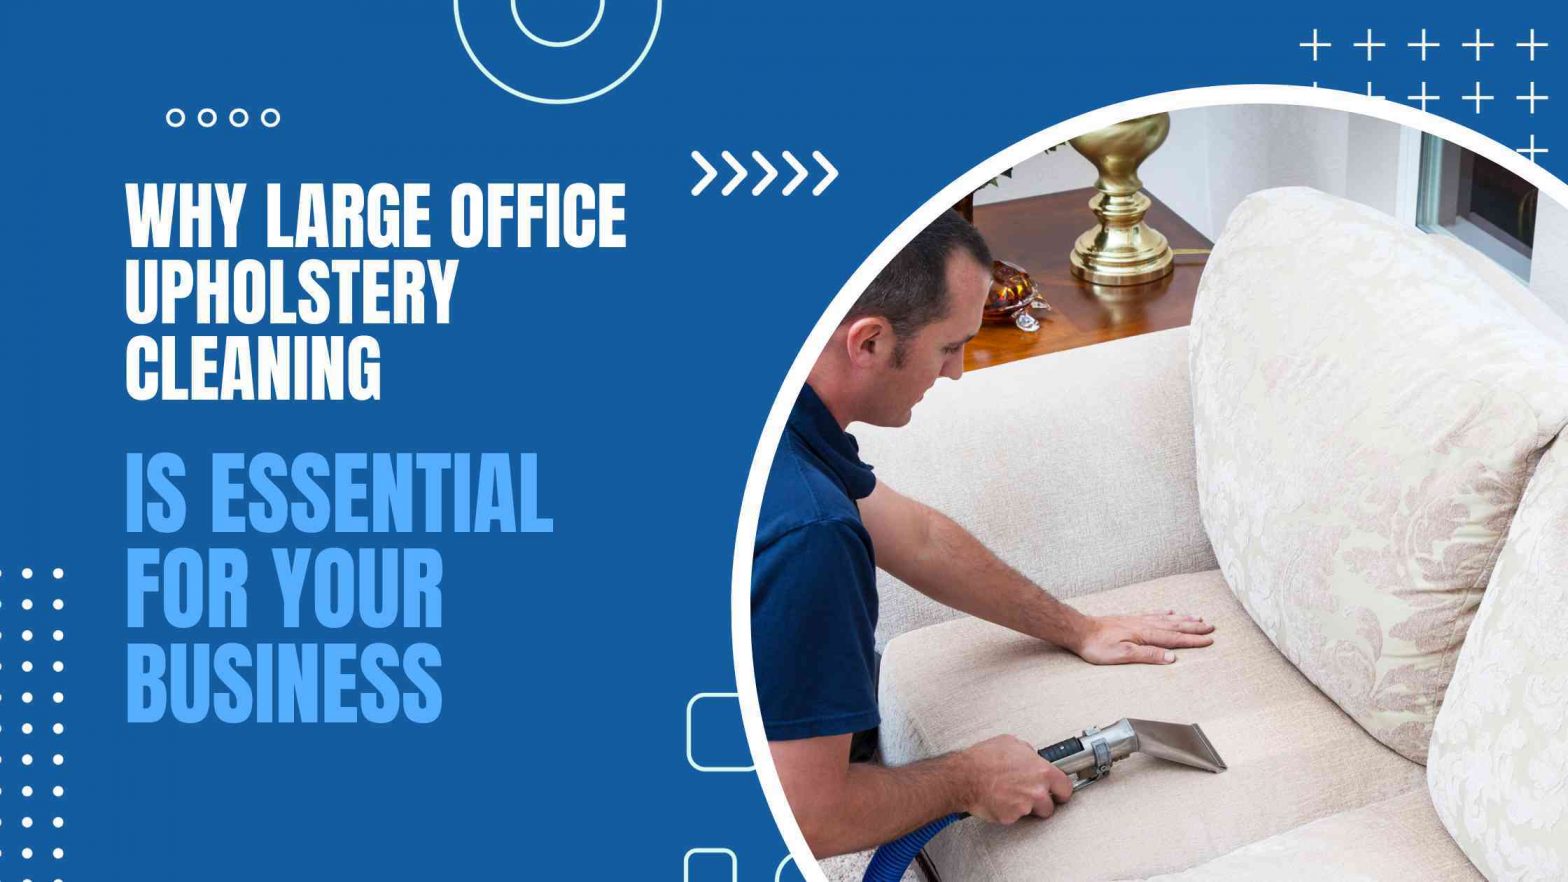 Large Office Upholstery Cleaning